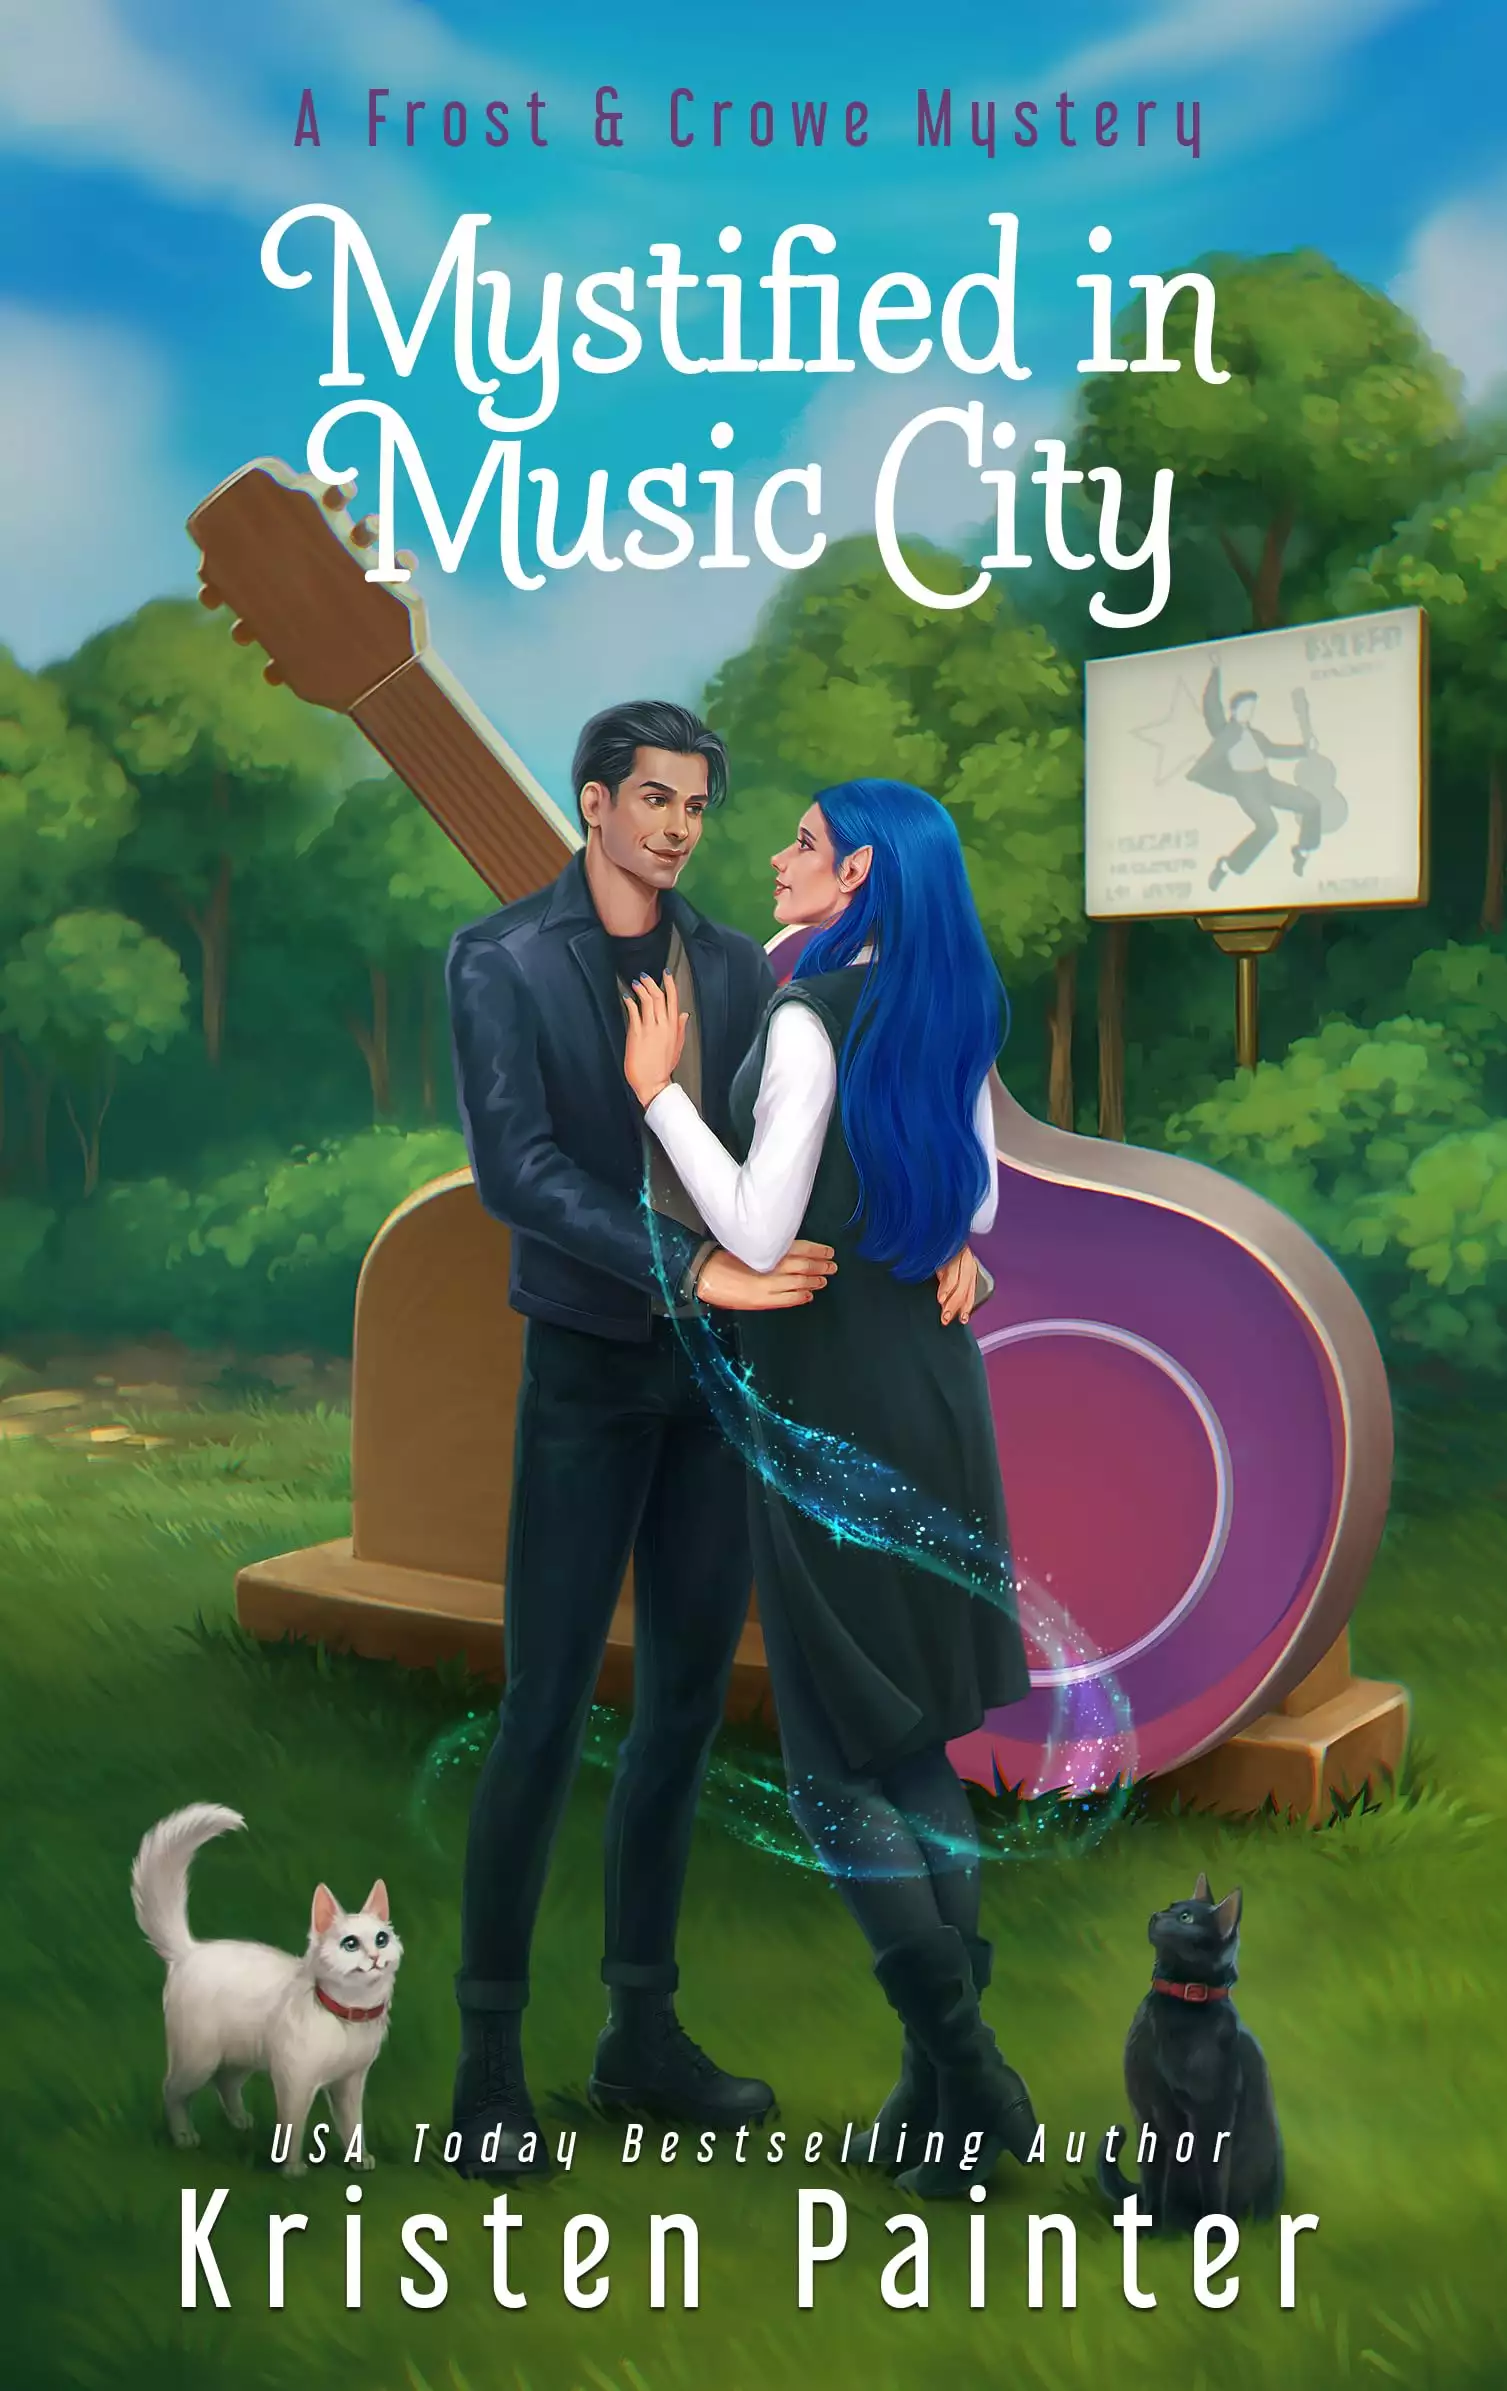 Mystified in Music City: A Frost & Crowe Mystery